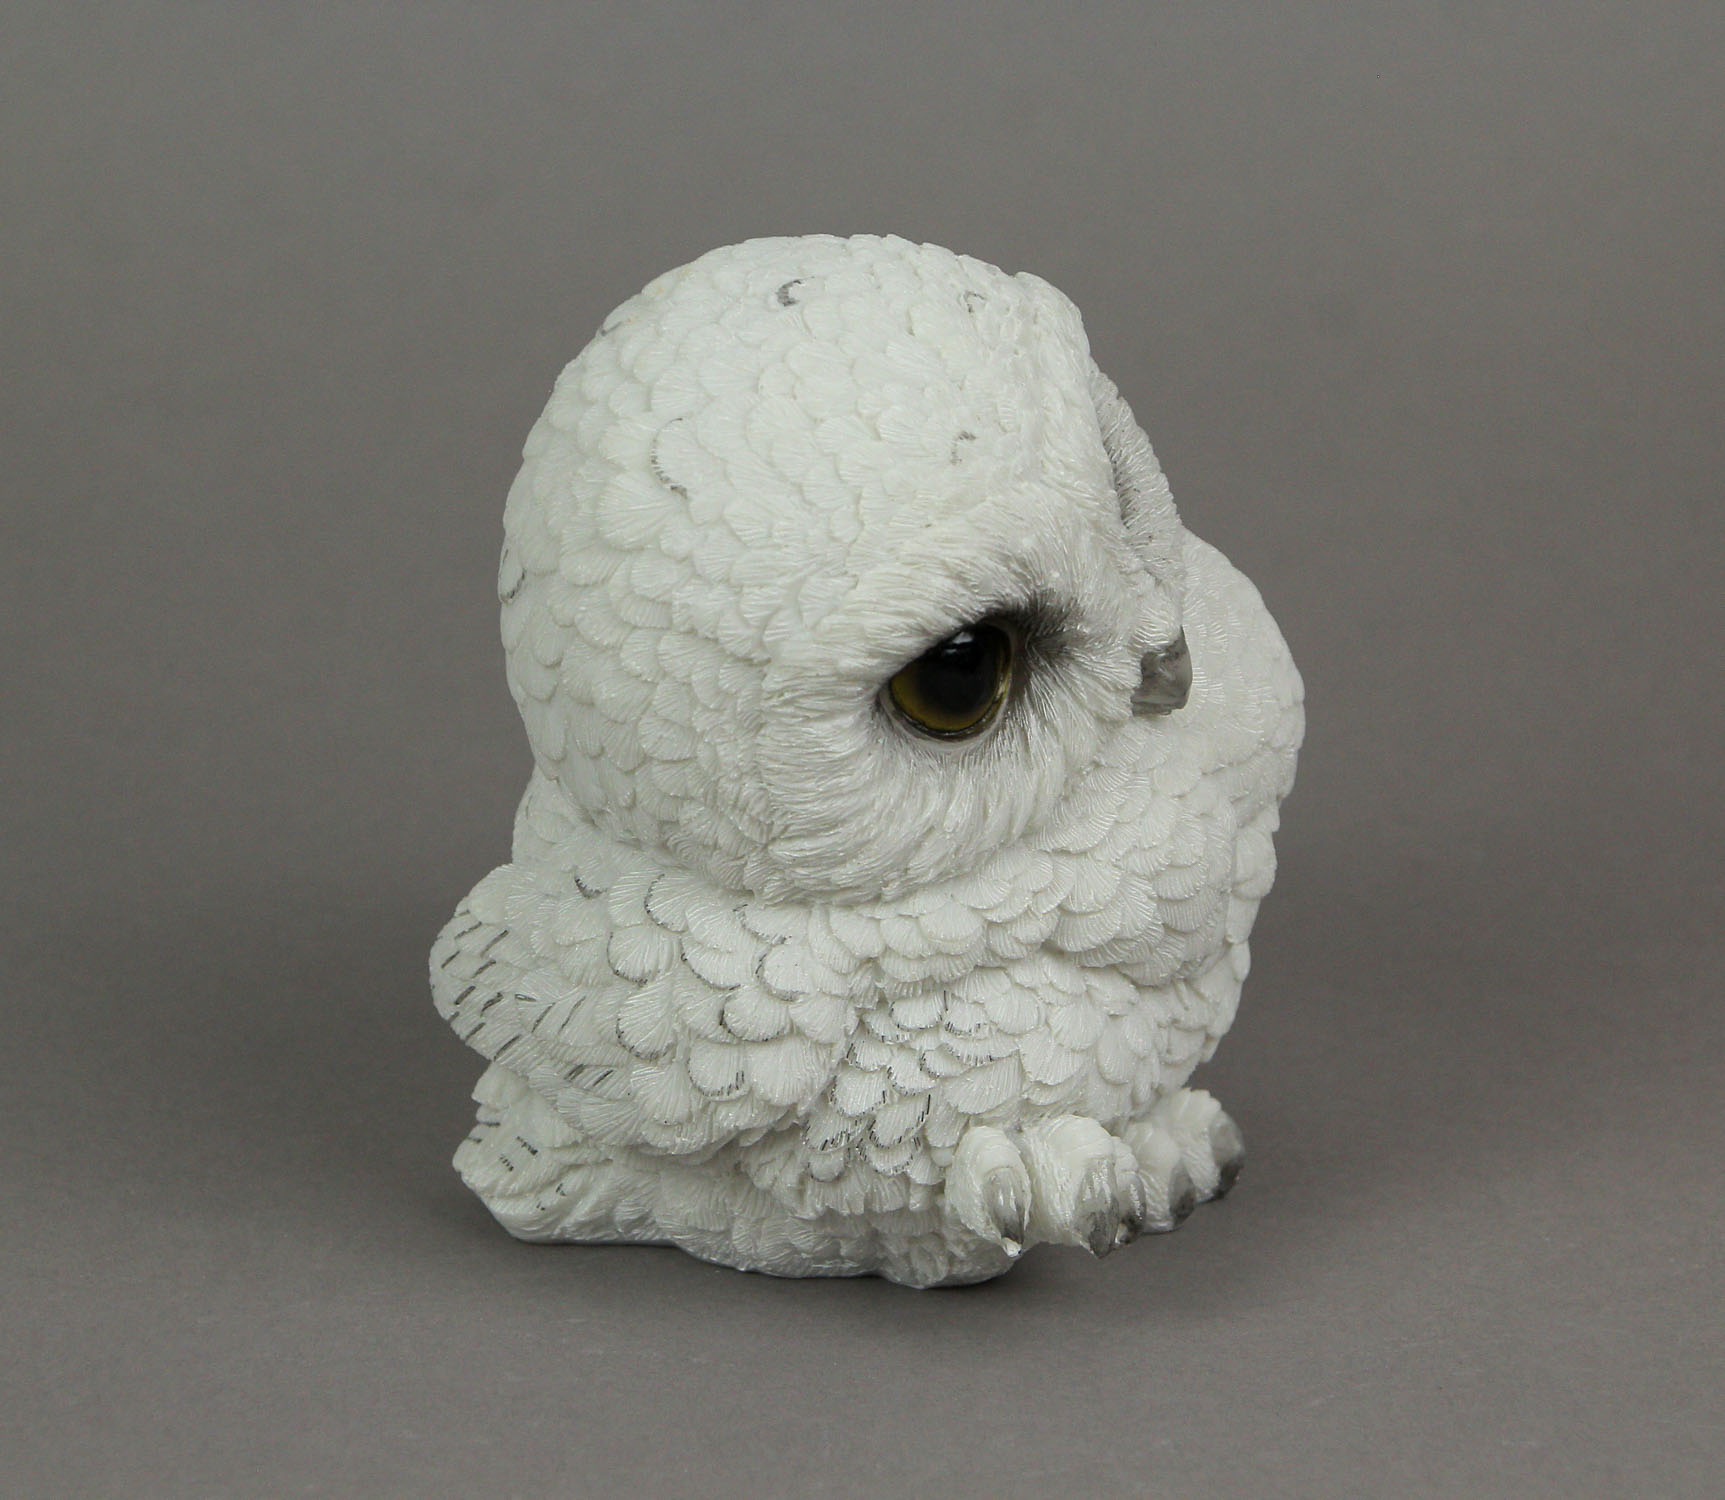 Everspring Adorable Big Eyed White Baby Snowy Owl Mini Statue 4.75 inches High - image 3 of 4